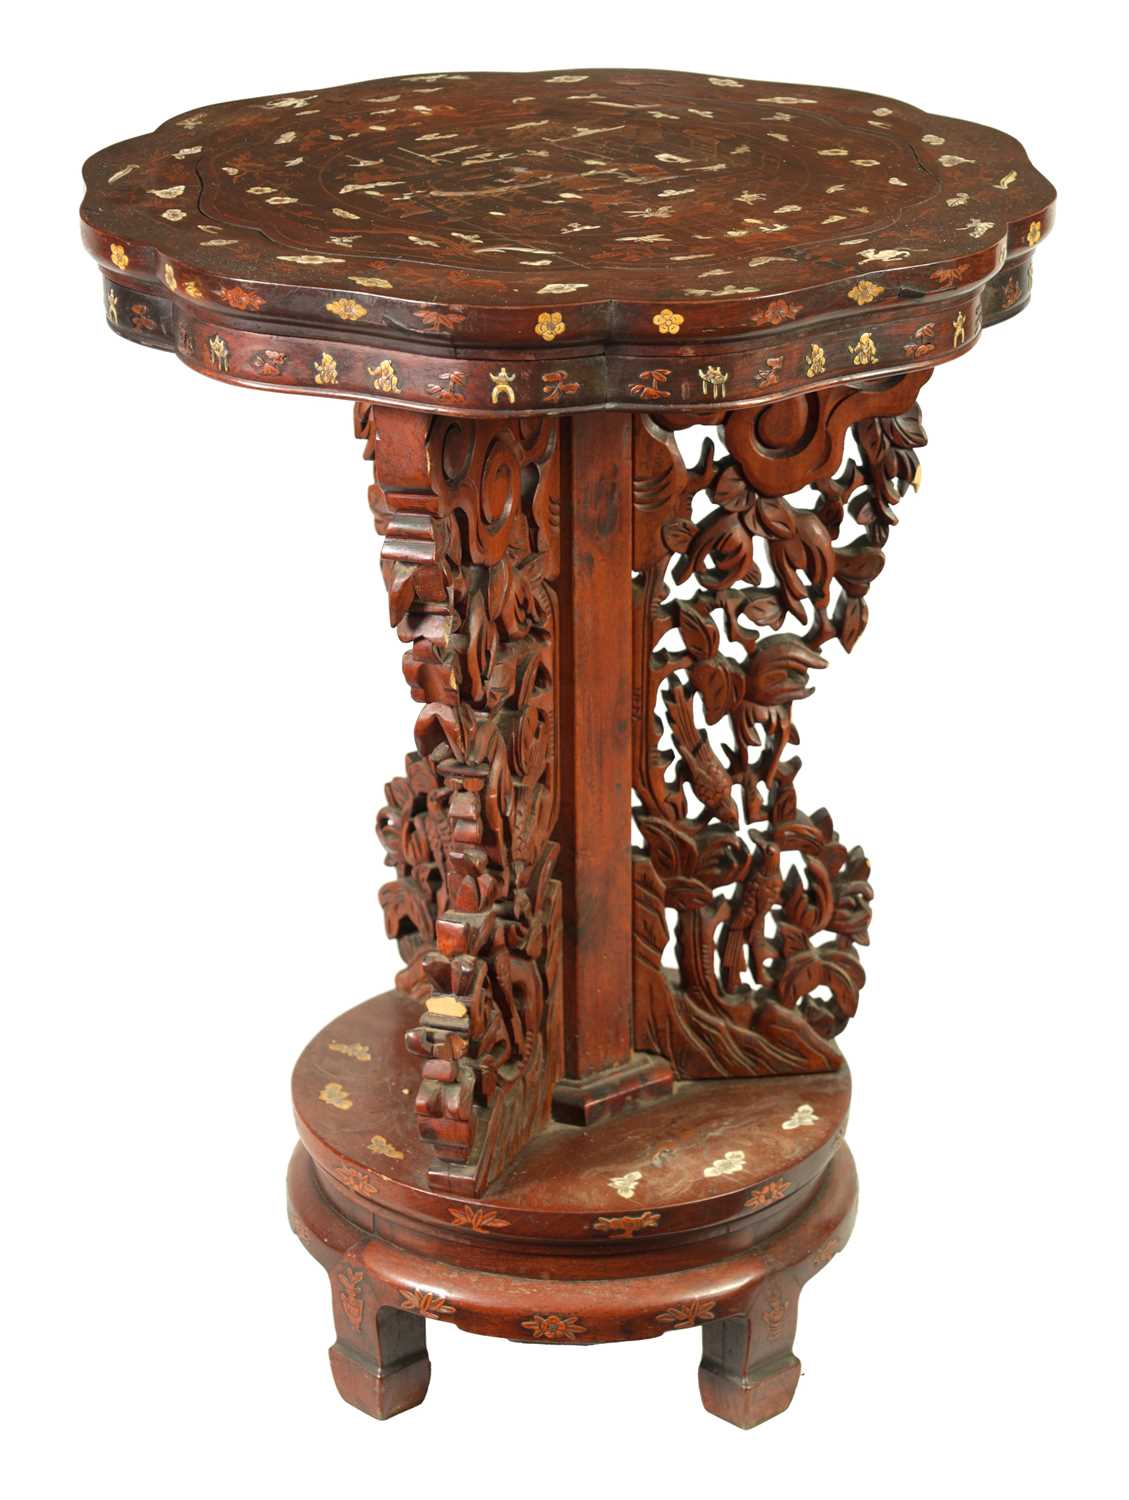 A 19TH CENTURY CHINESE BOXWOOD AND IVORY INLAID HARDWOOD OCCASIONAL TABLE